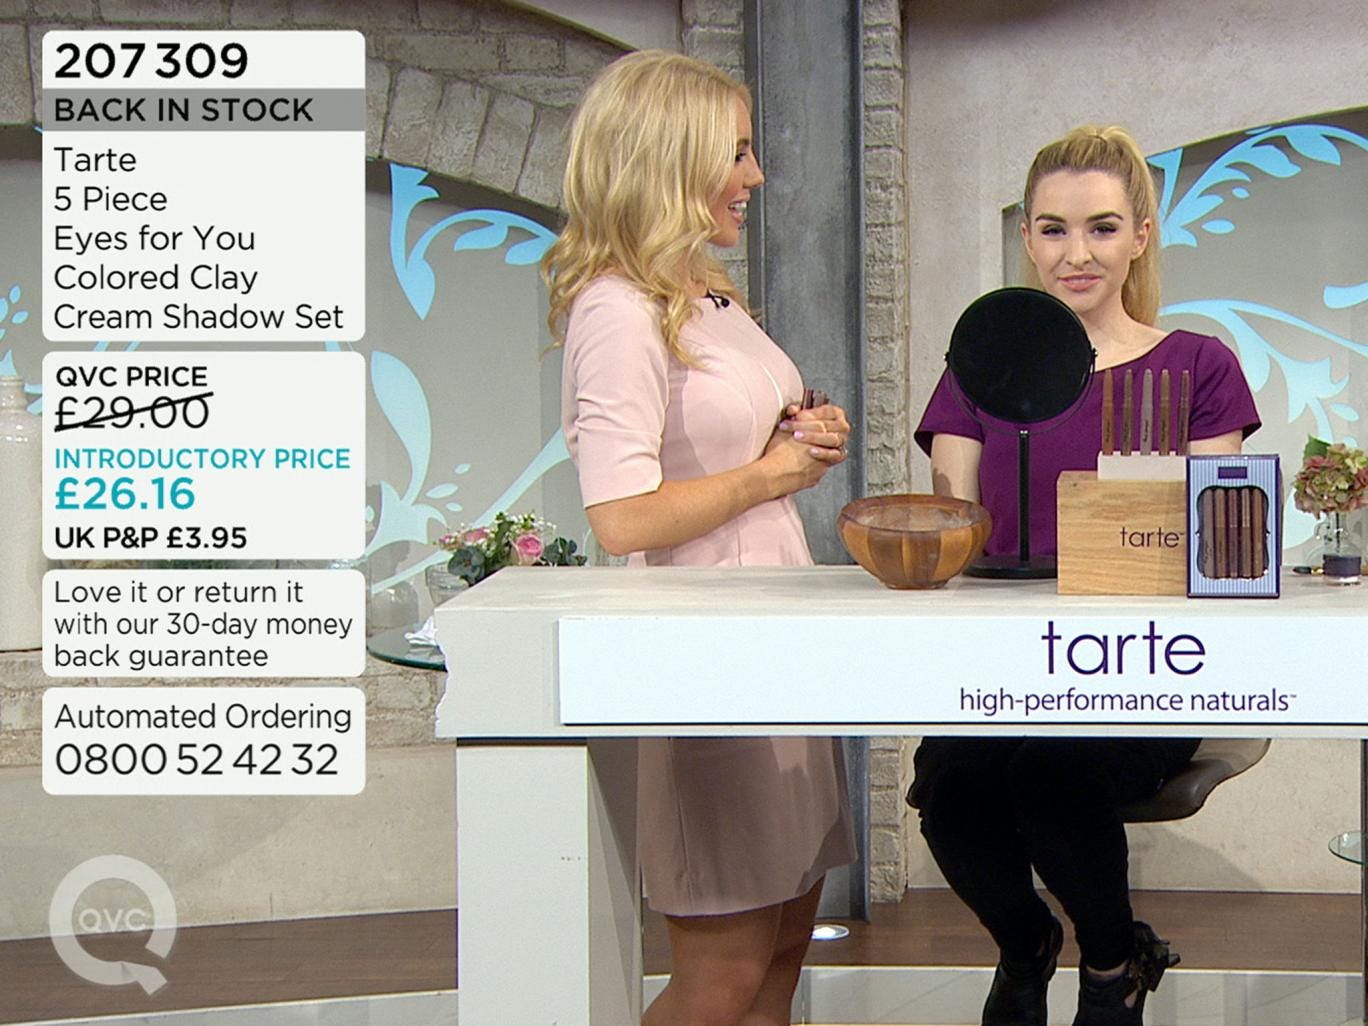 QVC: How the American home-shopping channel became one of the biggest